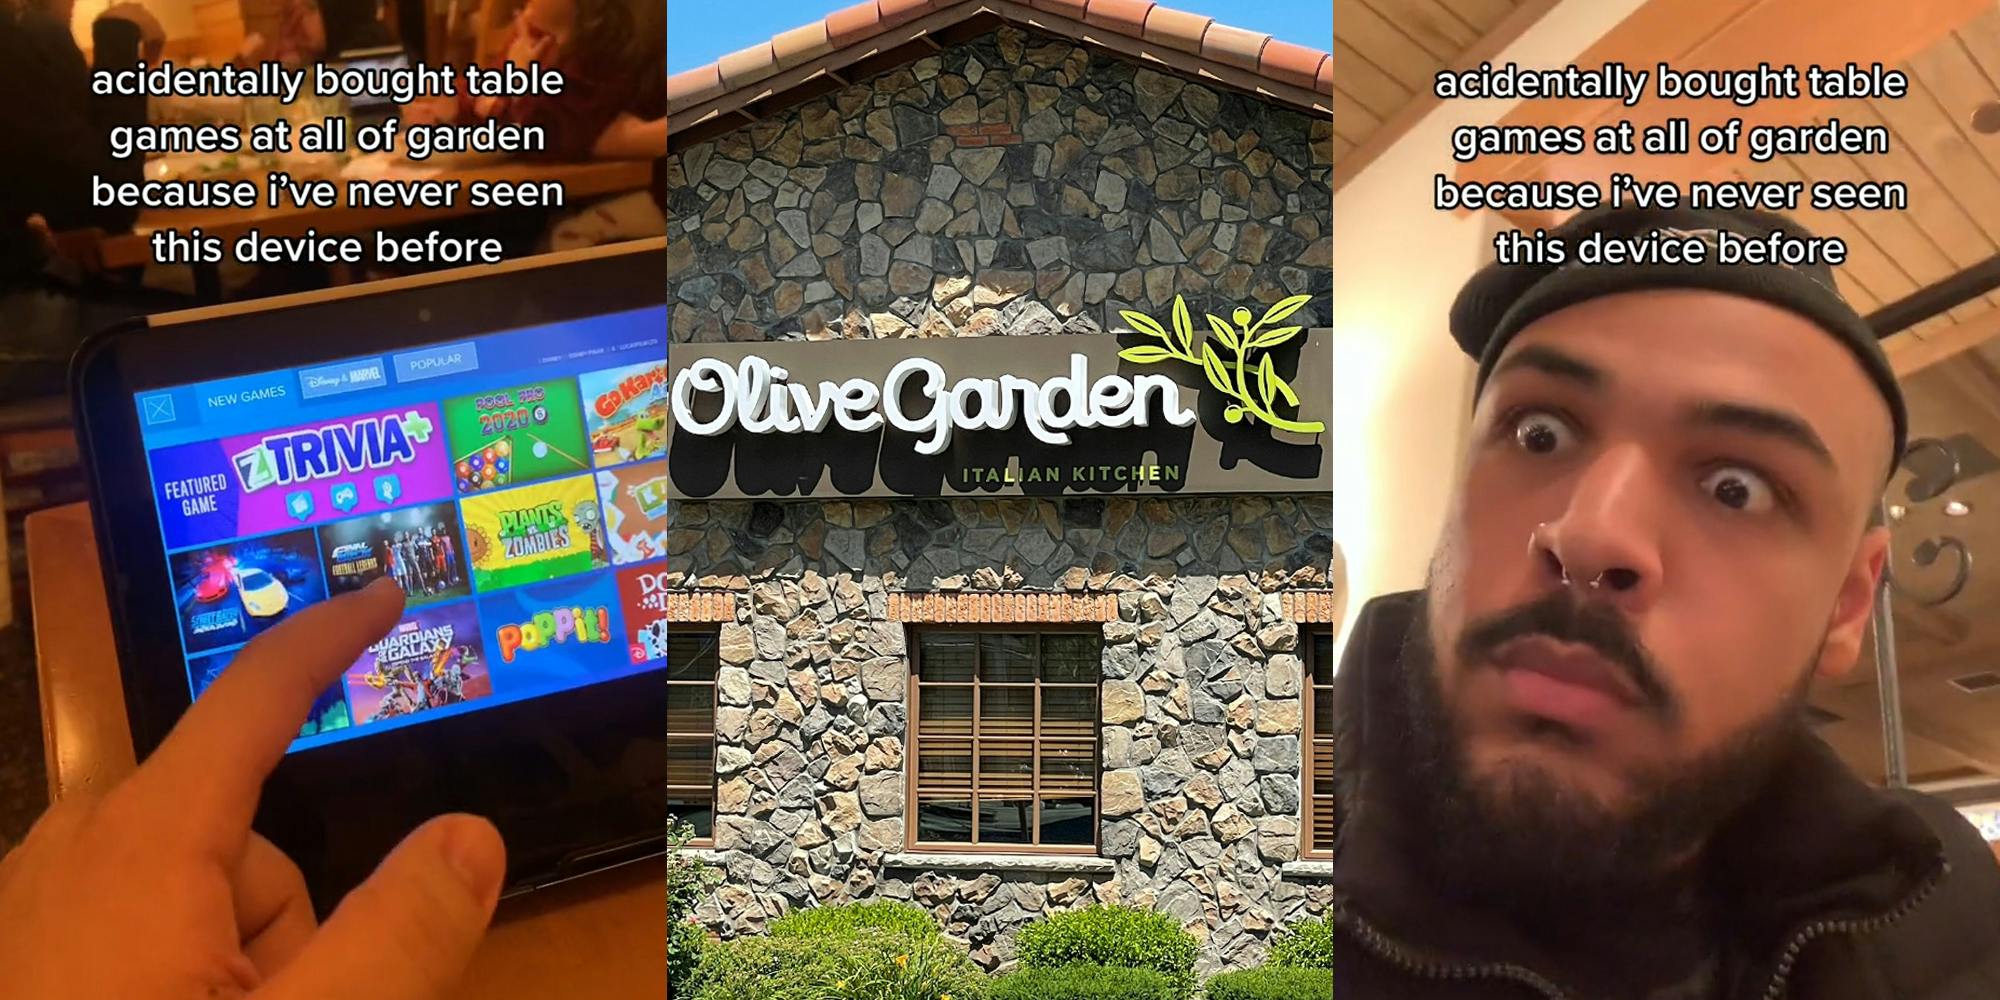 Olive Garden table games on tablet caption "accidentally bought table games at all of garden because i've never seen this device before" (l) Olive Garden building with sign (c) Man at Olive Garden with shocked expression caption"accidentally bought table games at all of garden because i've never seen this device before" (r)